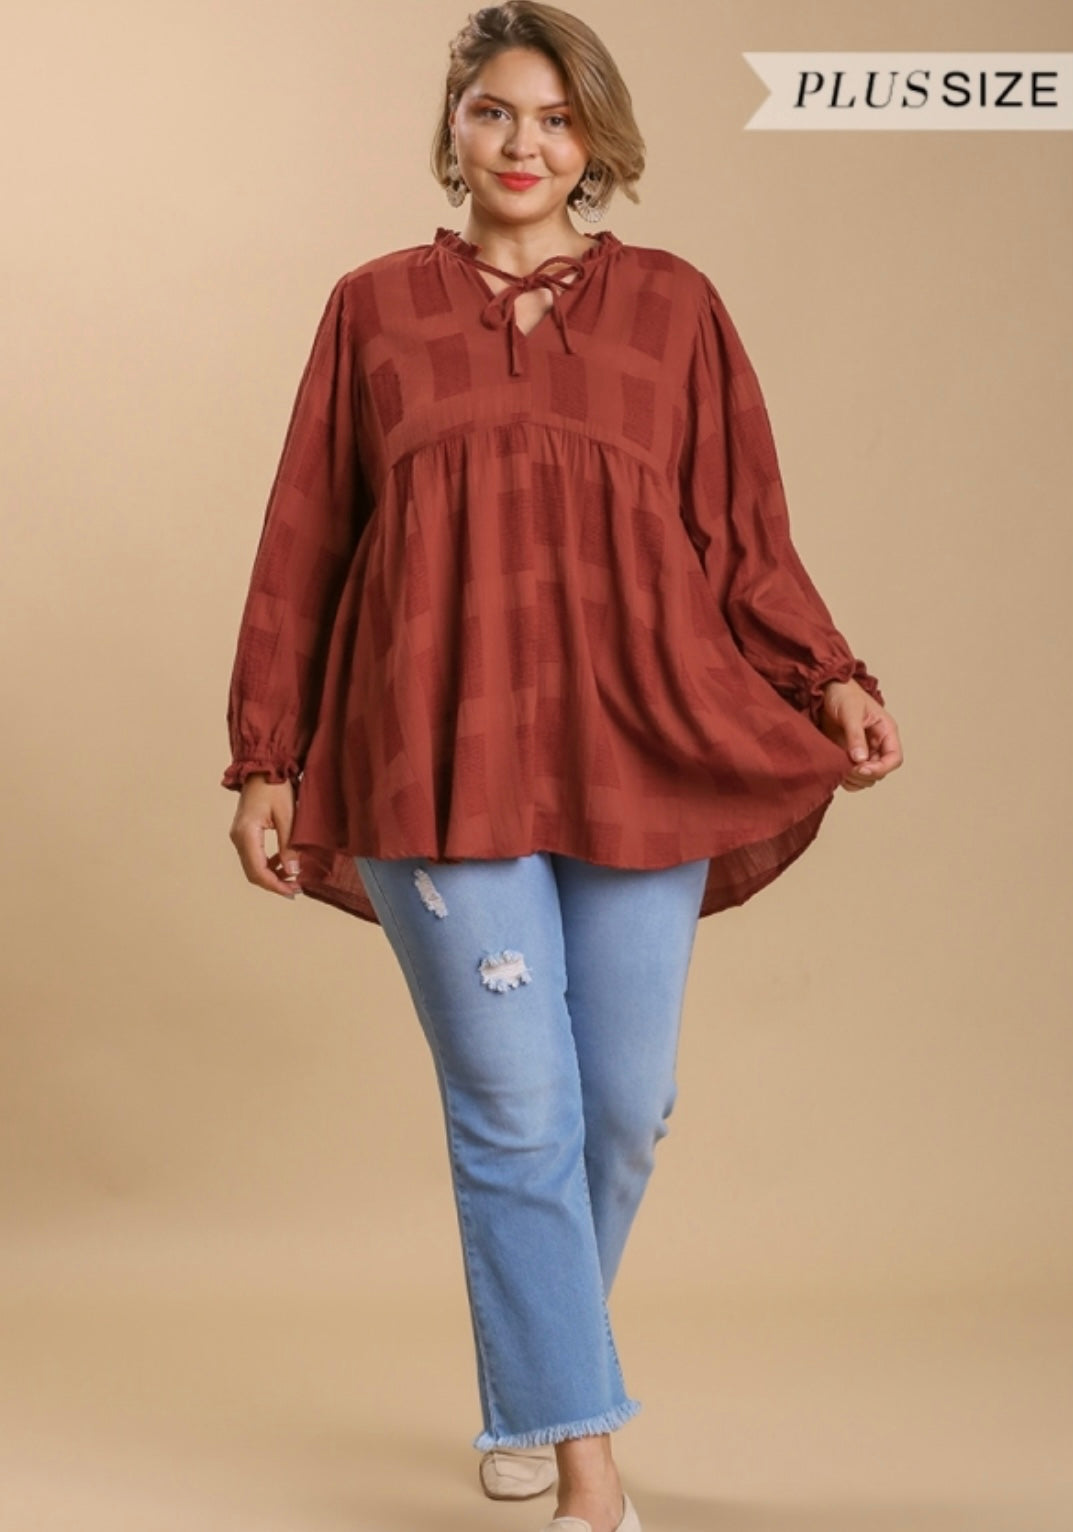 The Elsie Babydoll Tiered Top (Plus Size)/ Brick